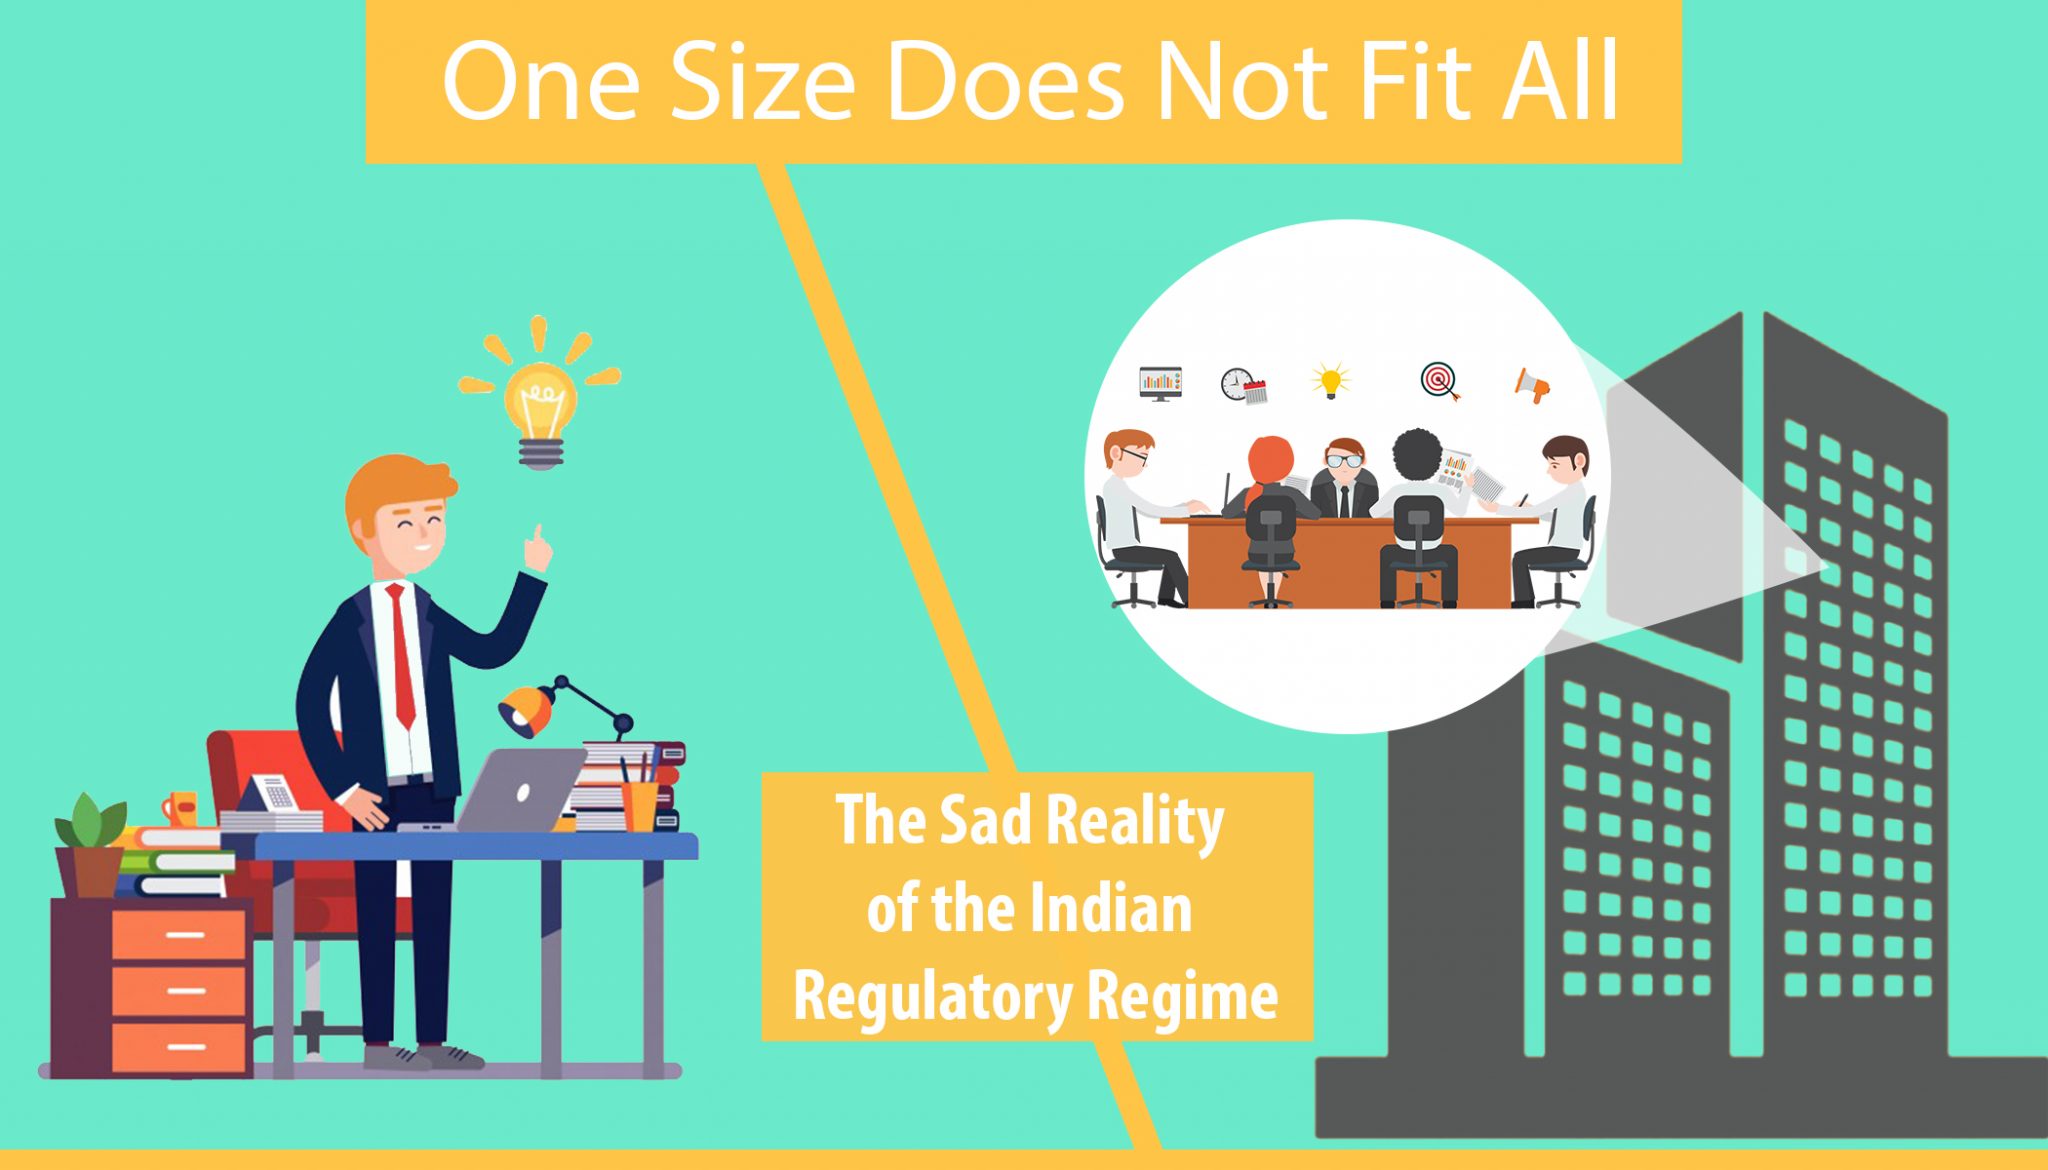 The sad reality of the Indian Regulatory Regime